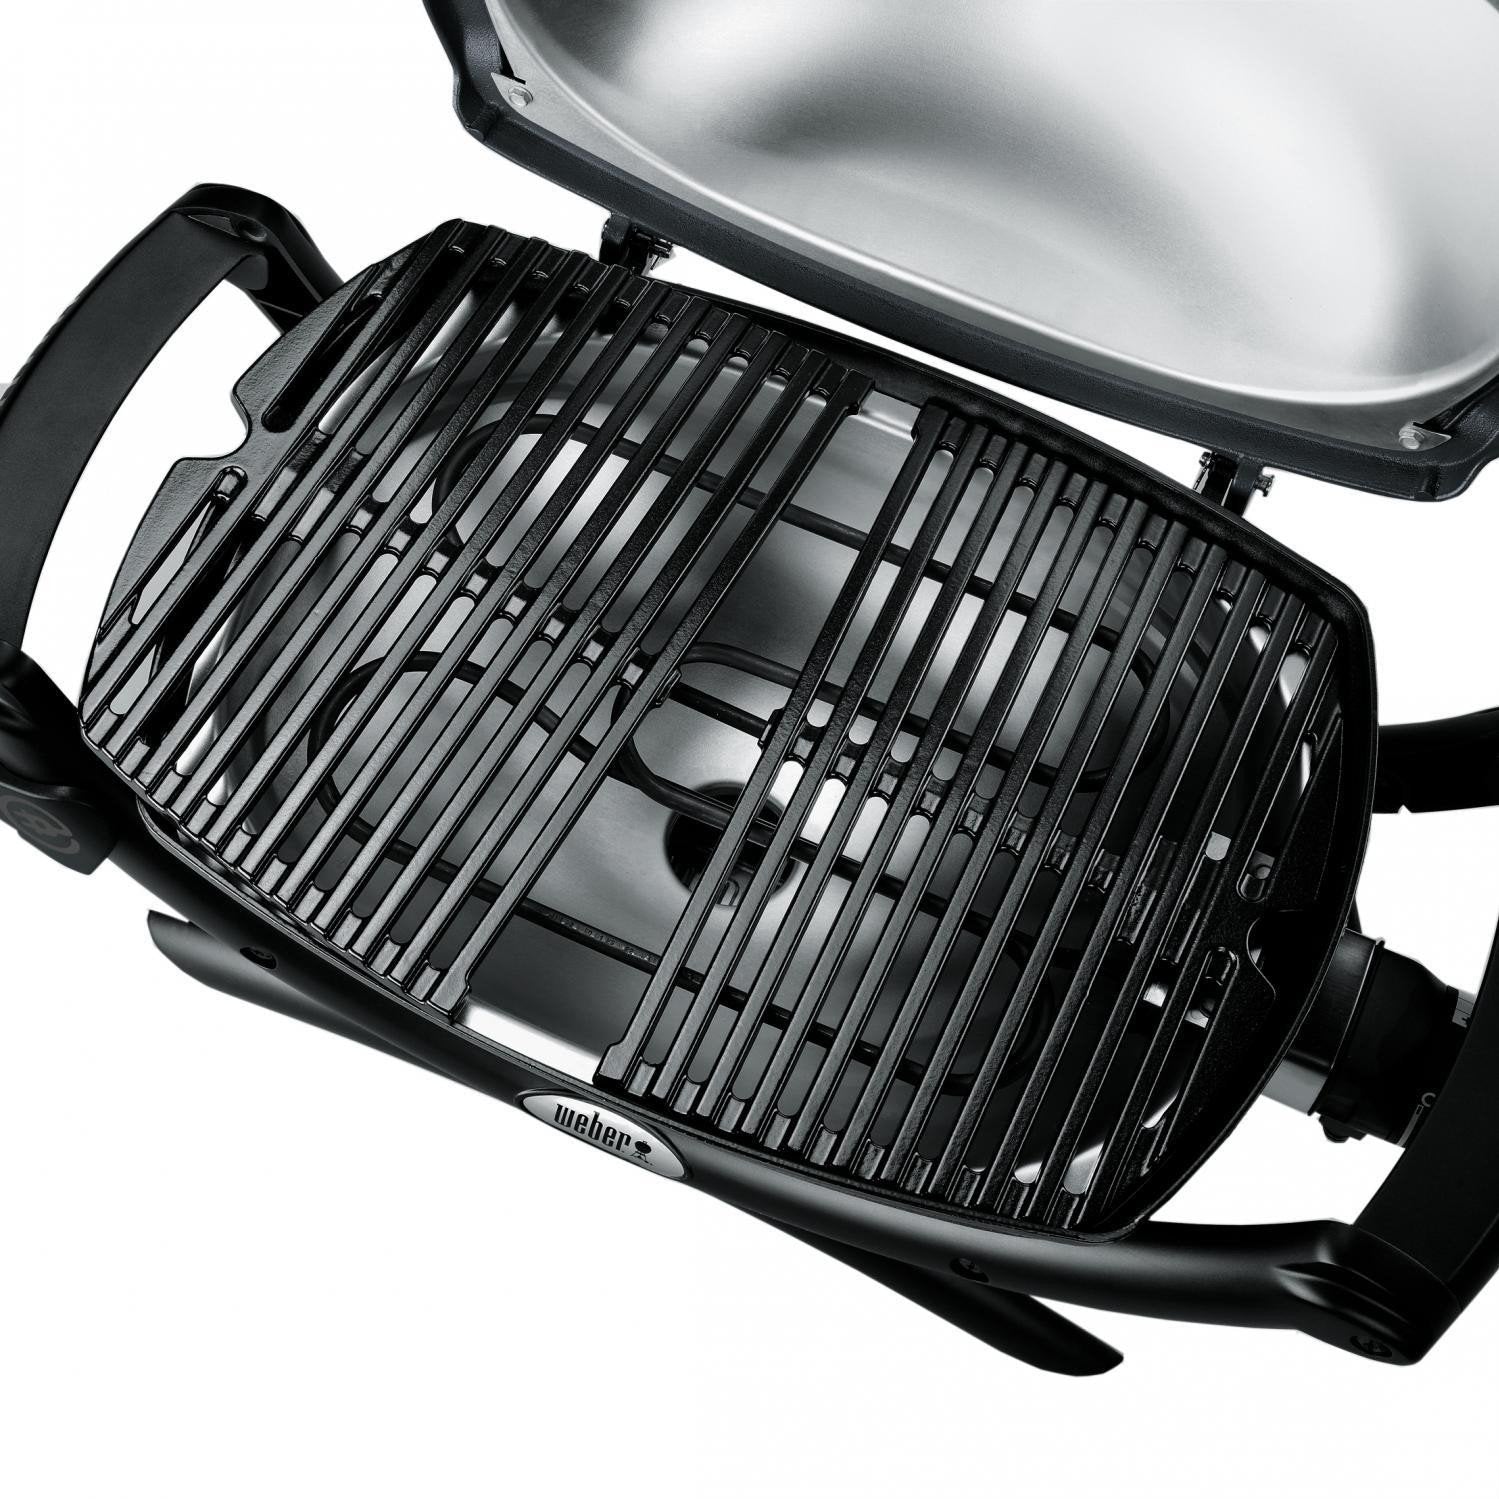 Weber Q 2400 Electric Grill Sale at BBQ